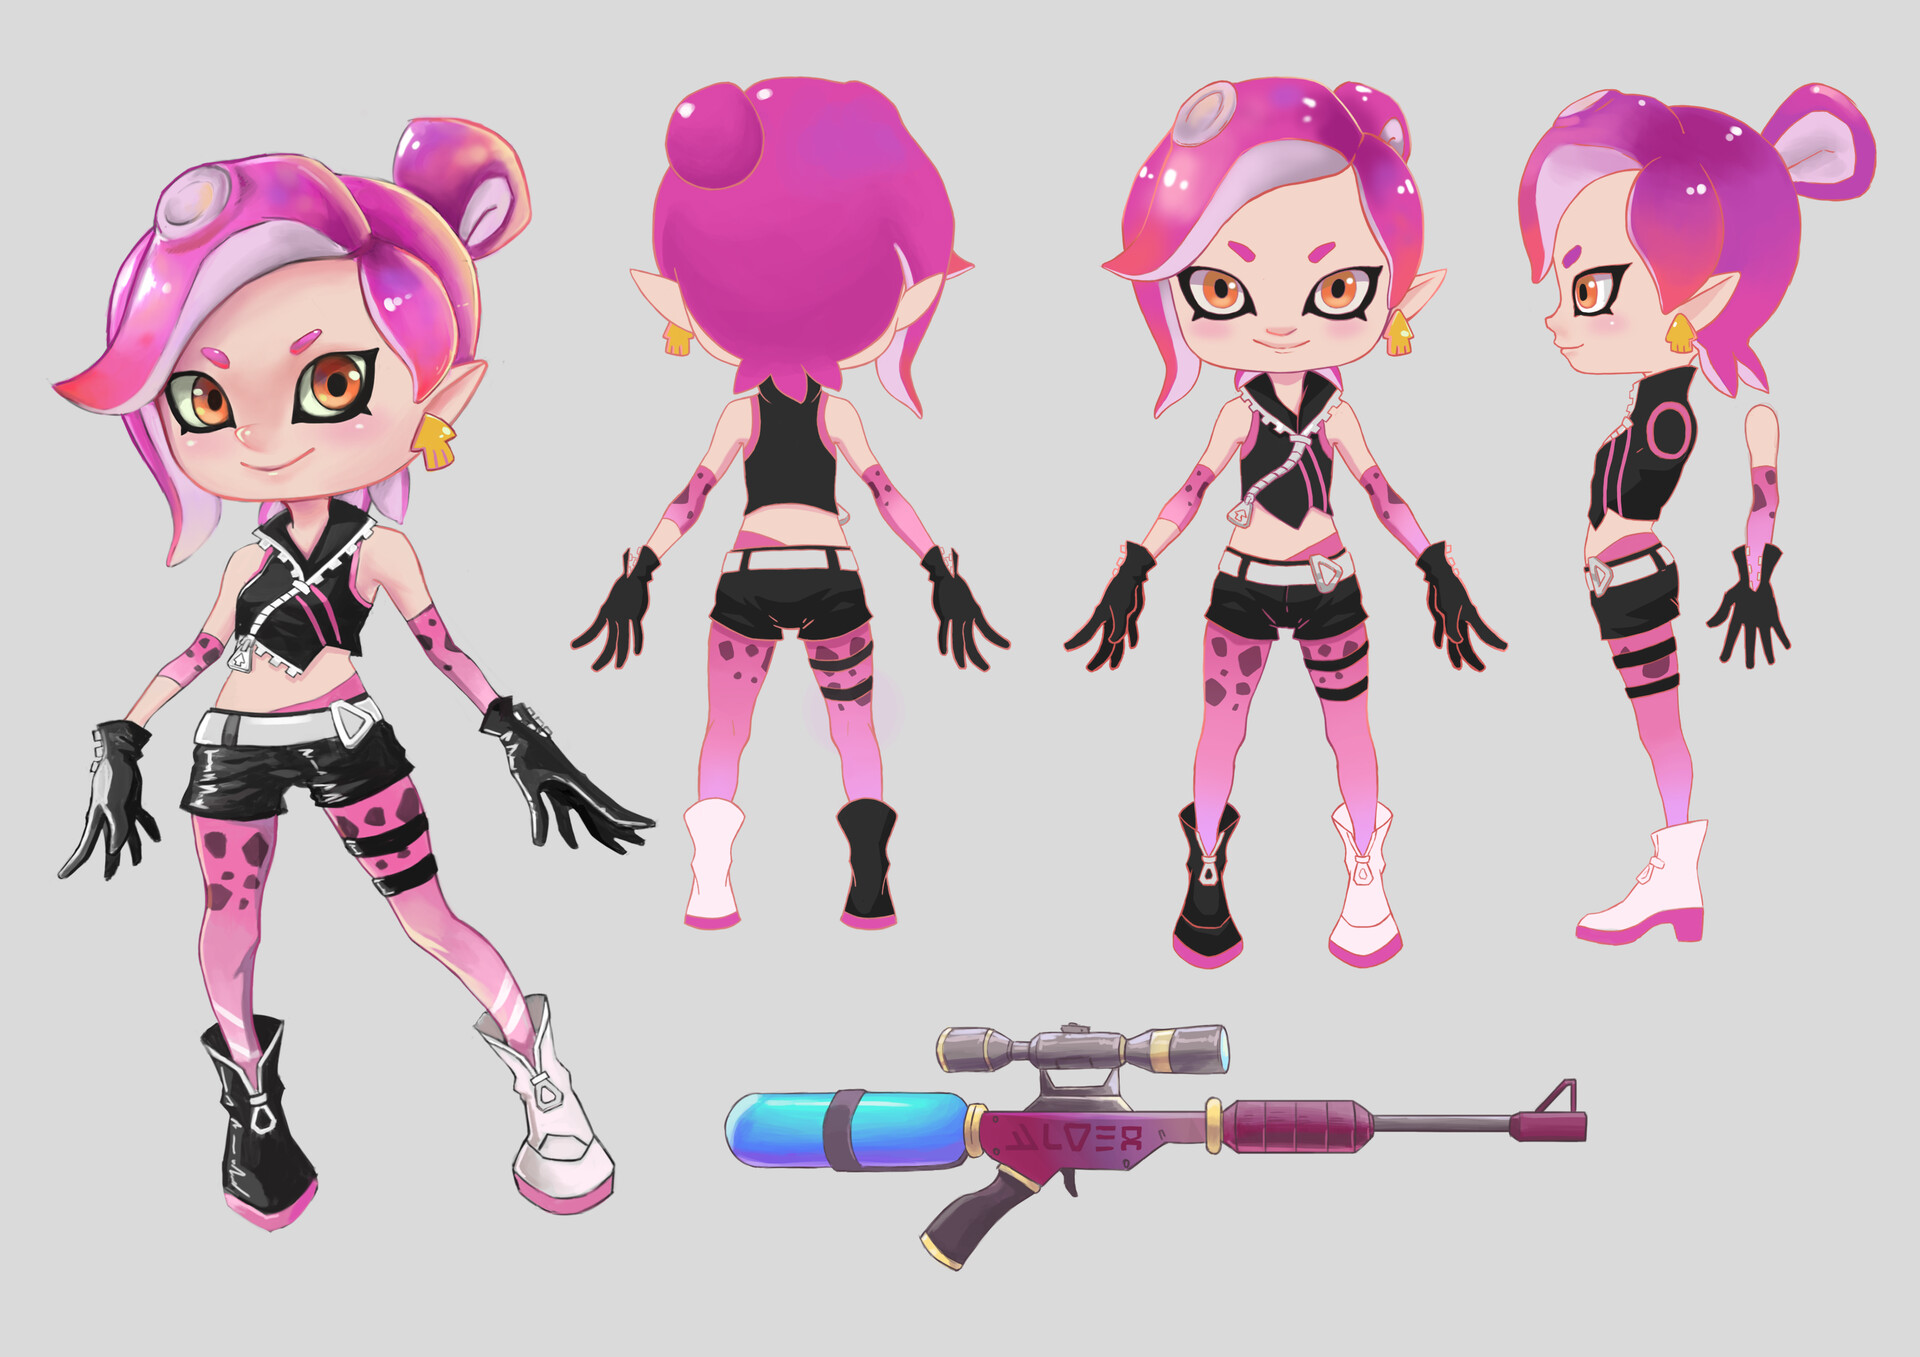 Based on Splaton 2's new character addition, the Octoling.